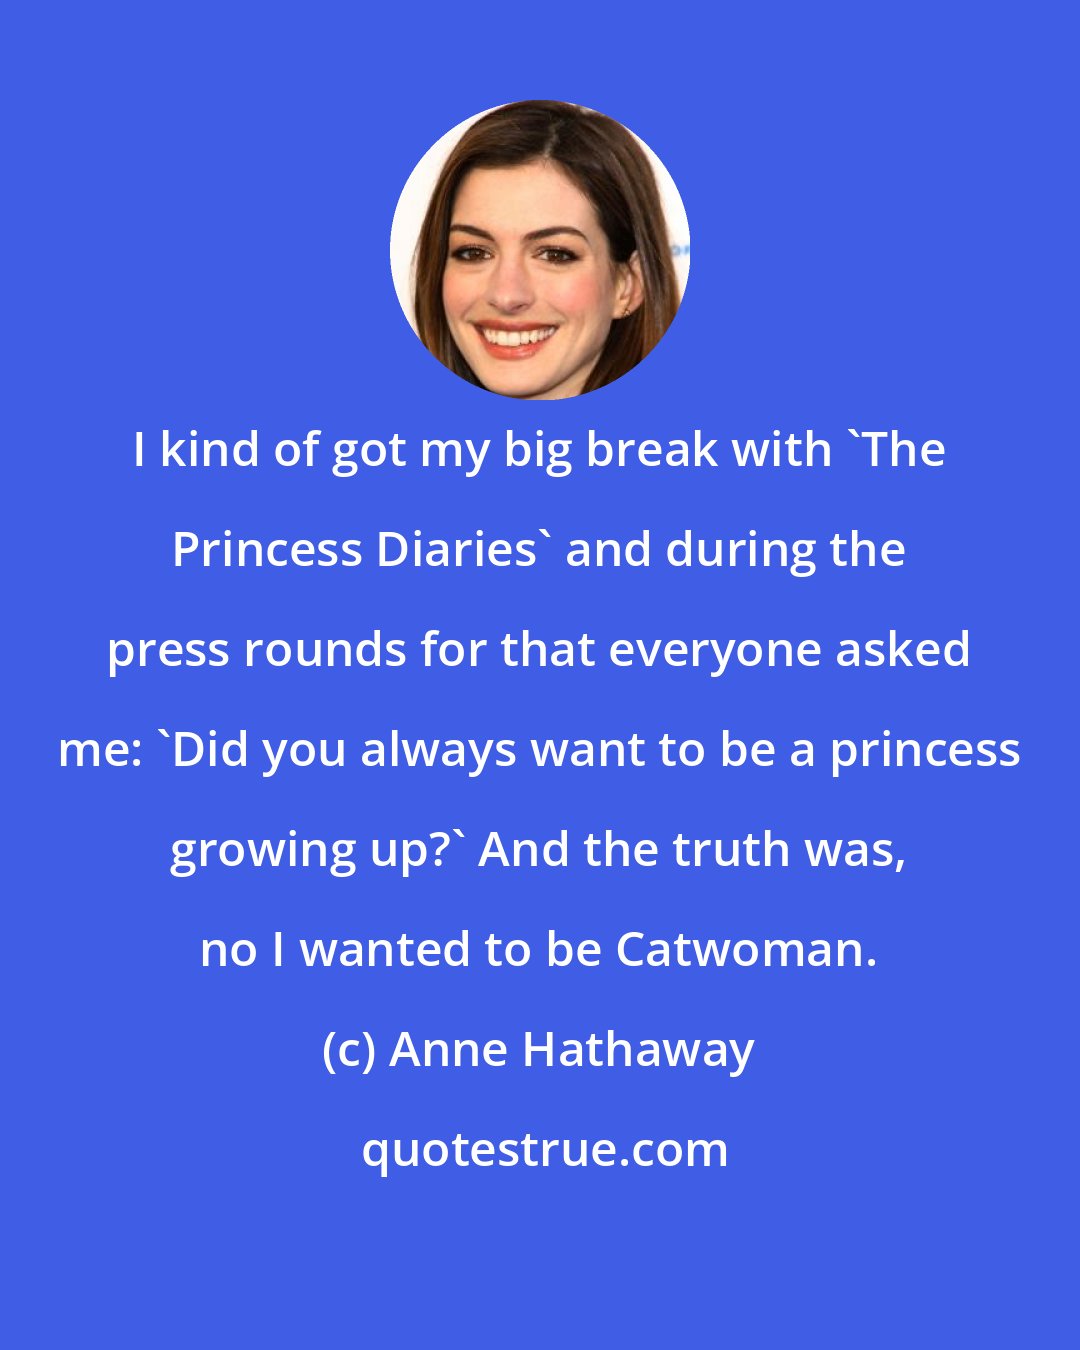 Anne Hathaway: I kind of got my big break with 'The Princess Diaries' and during the press rounds for that everyone asked me: 'Did you always want to be a princess growing up?' And the truth was, no I wanted to be Catwoman.